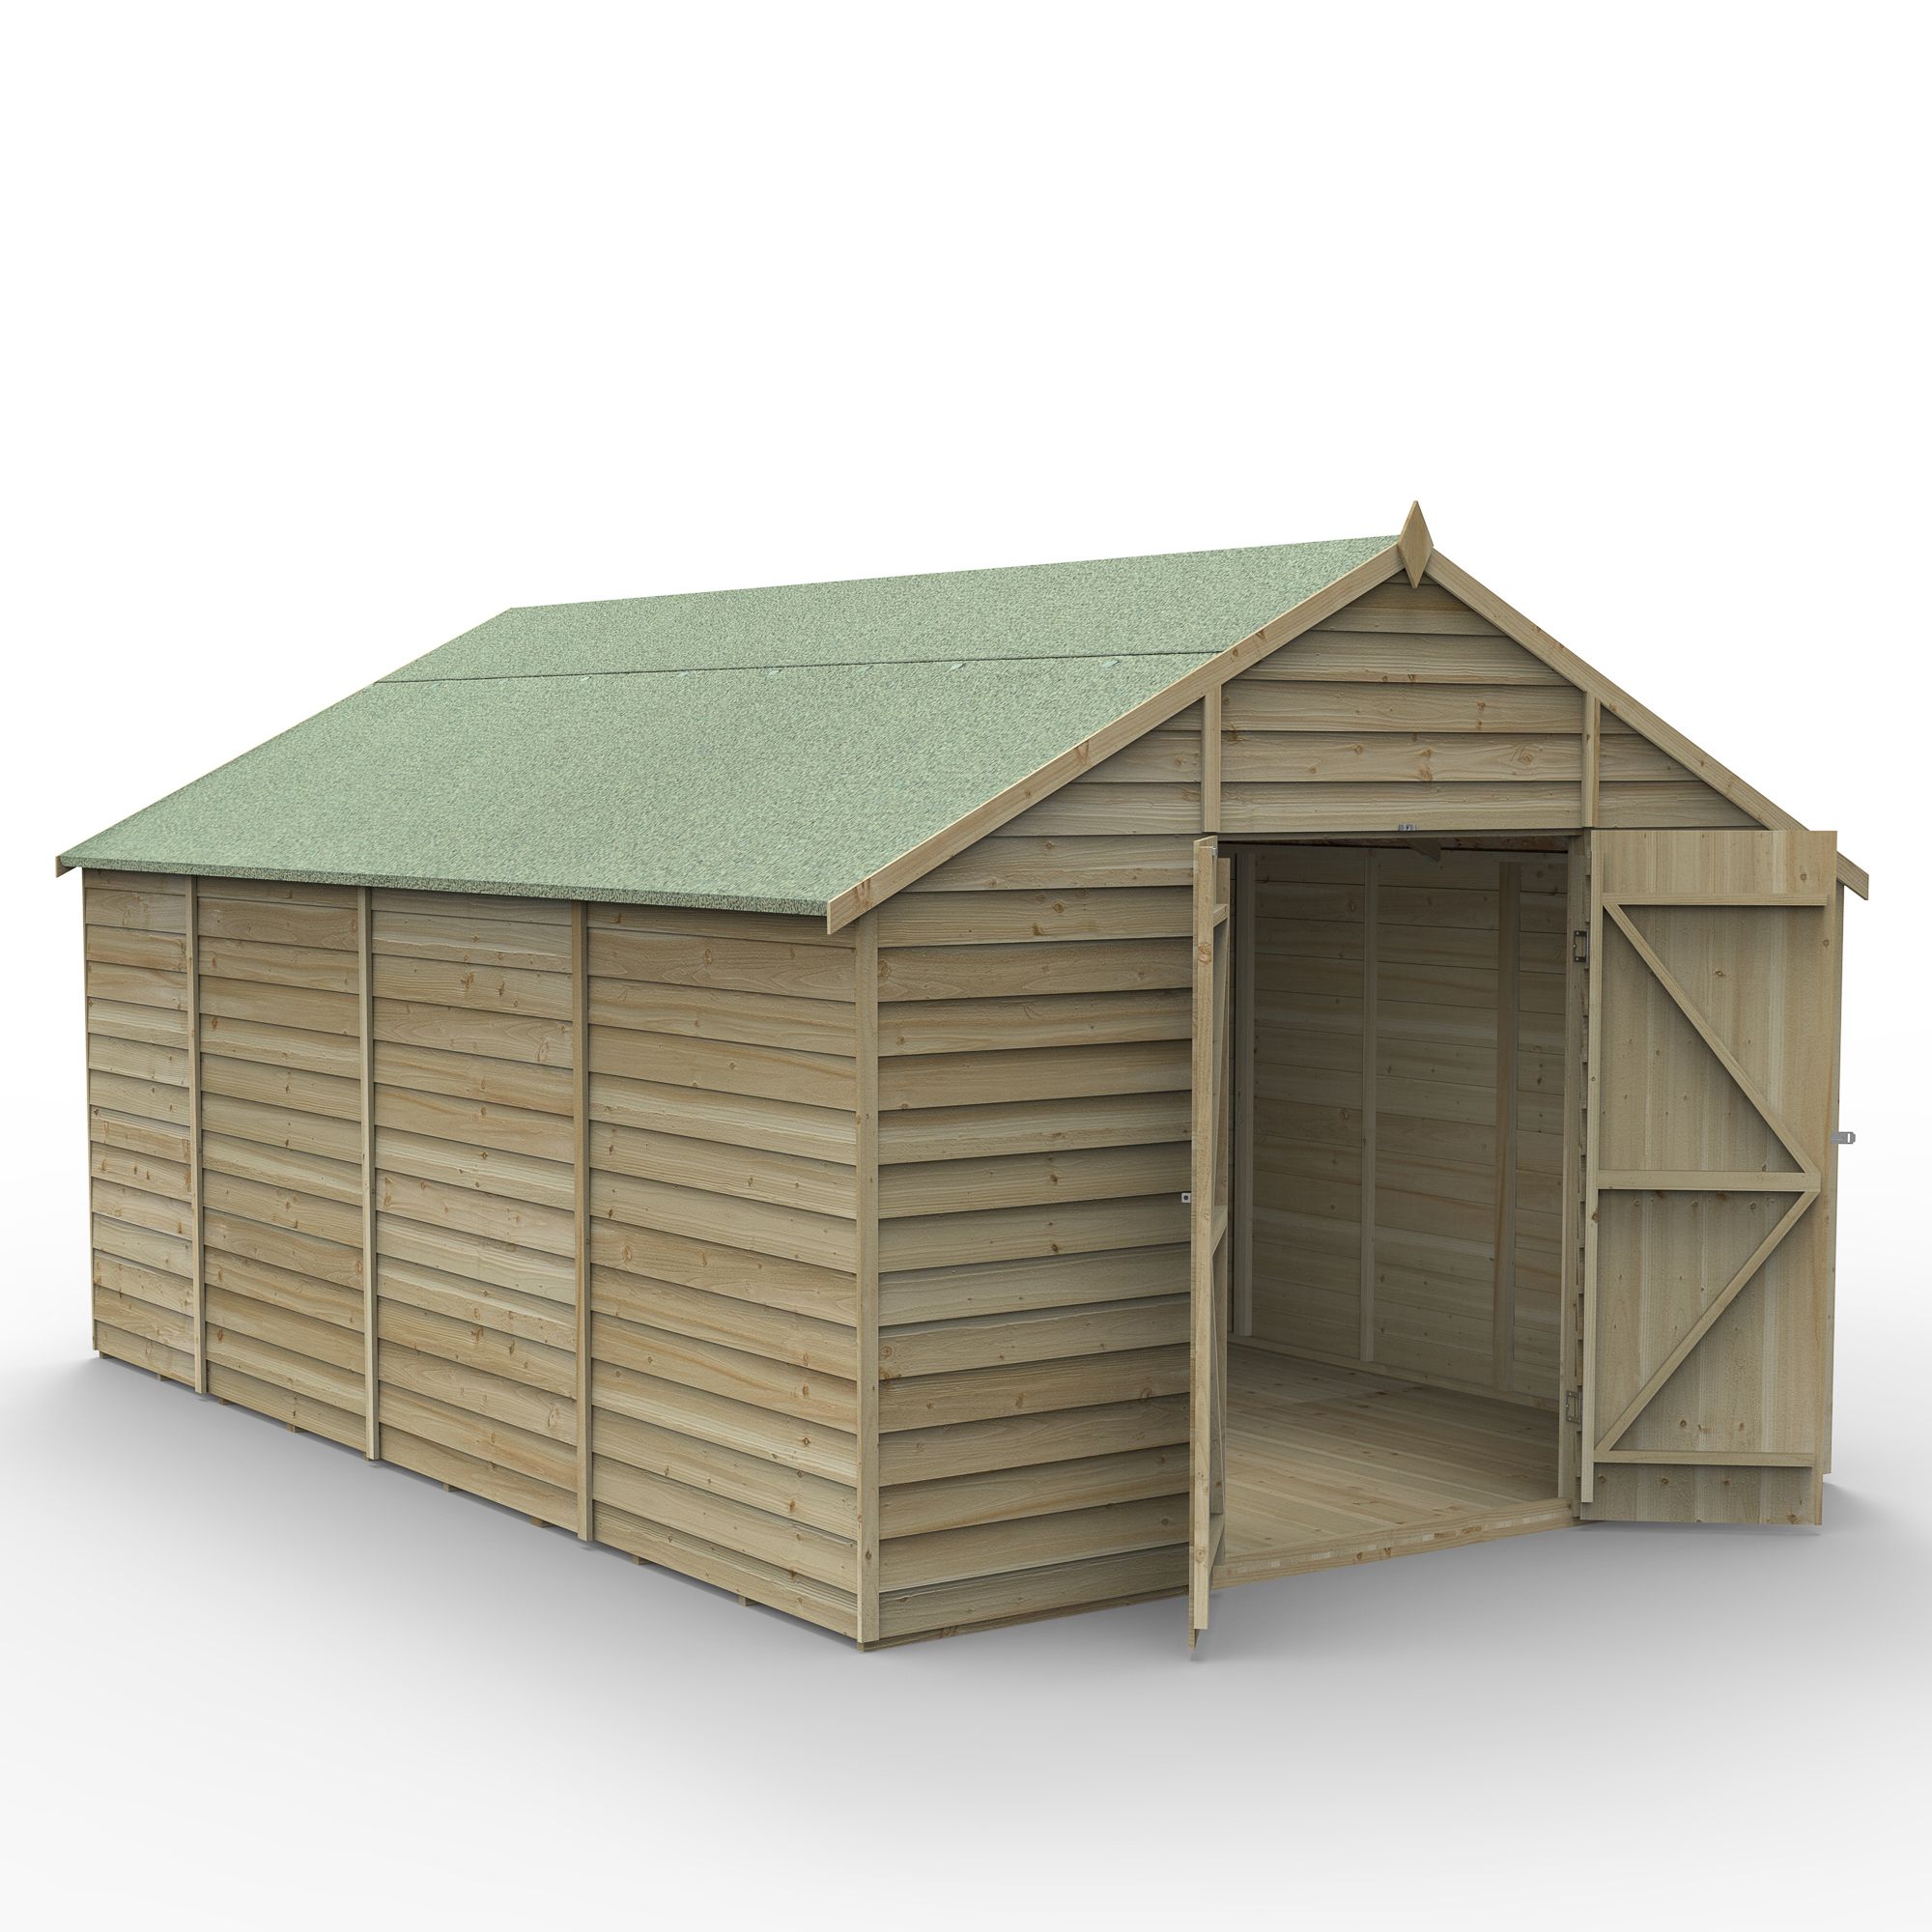 Forest Garden 10X15 Ft Apex Overlap Wooden Shed With Floor